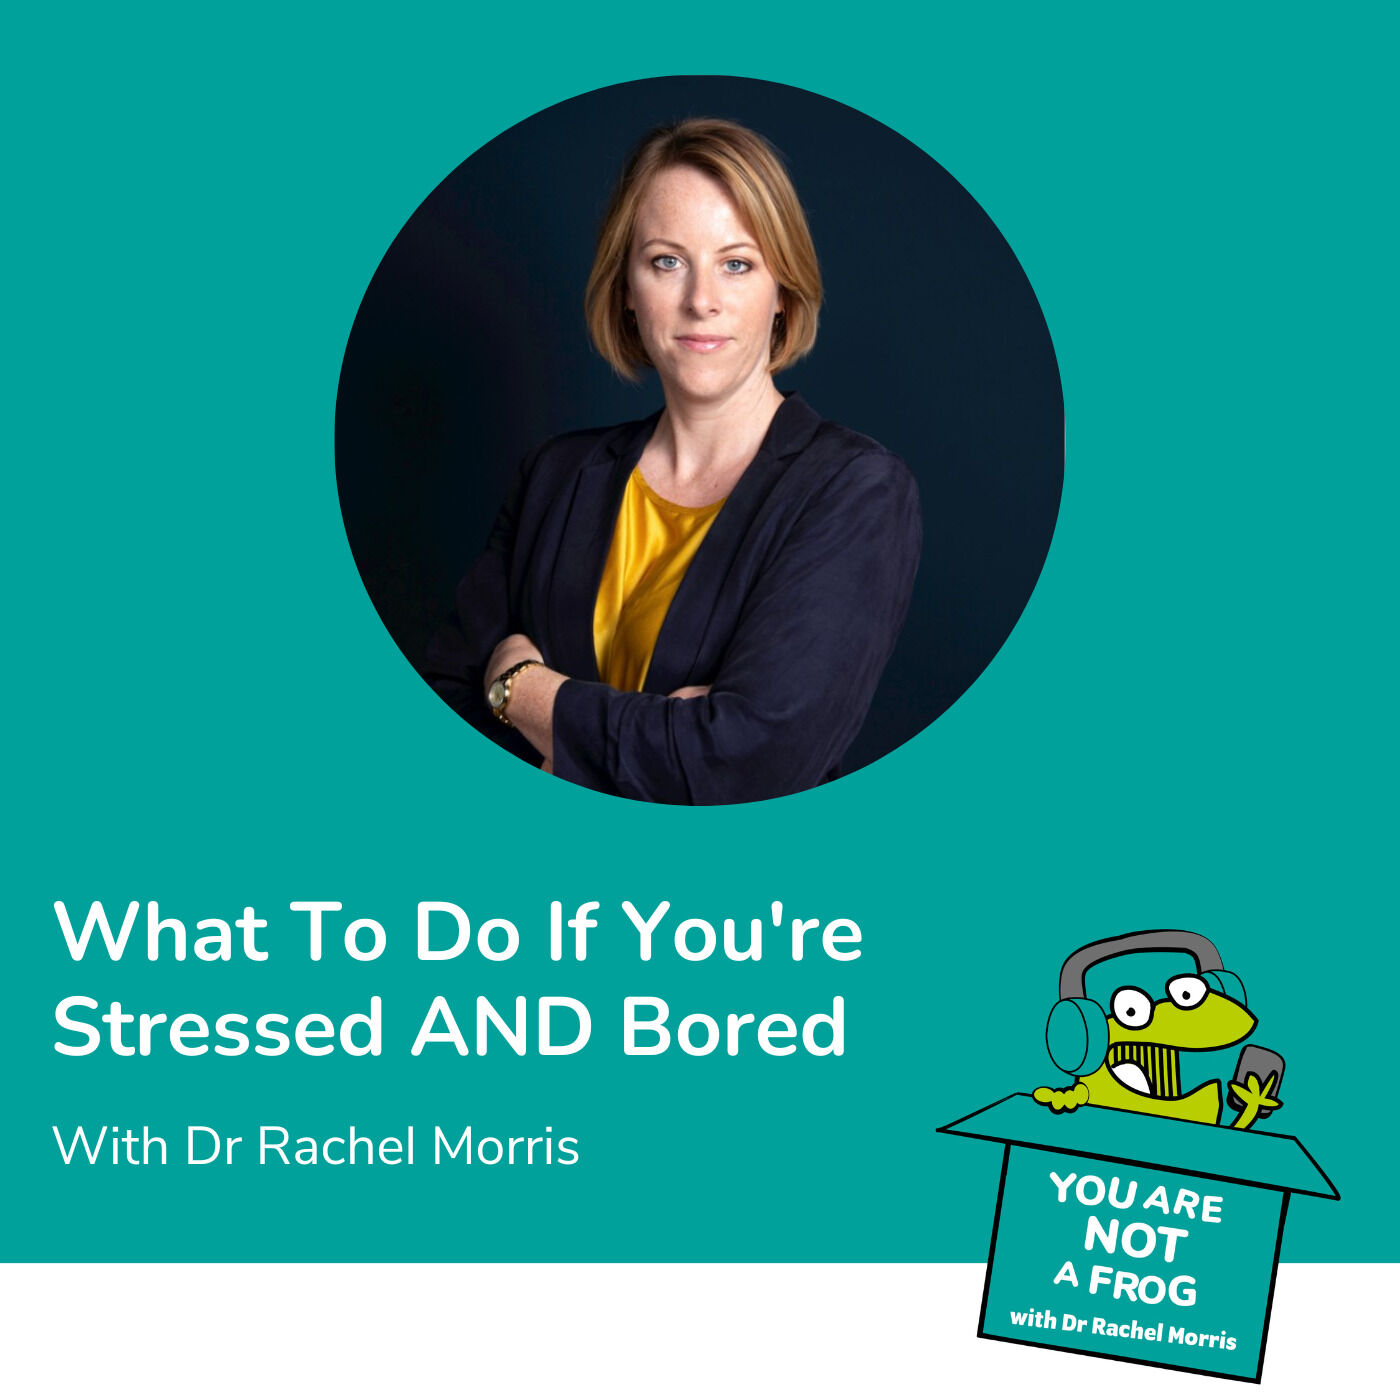 What to Do if You’re Stressed AND Bored